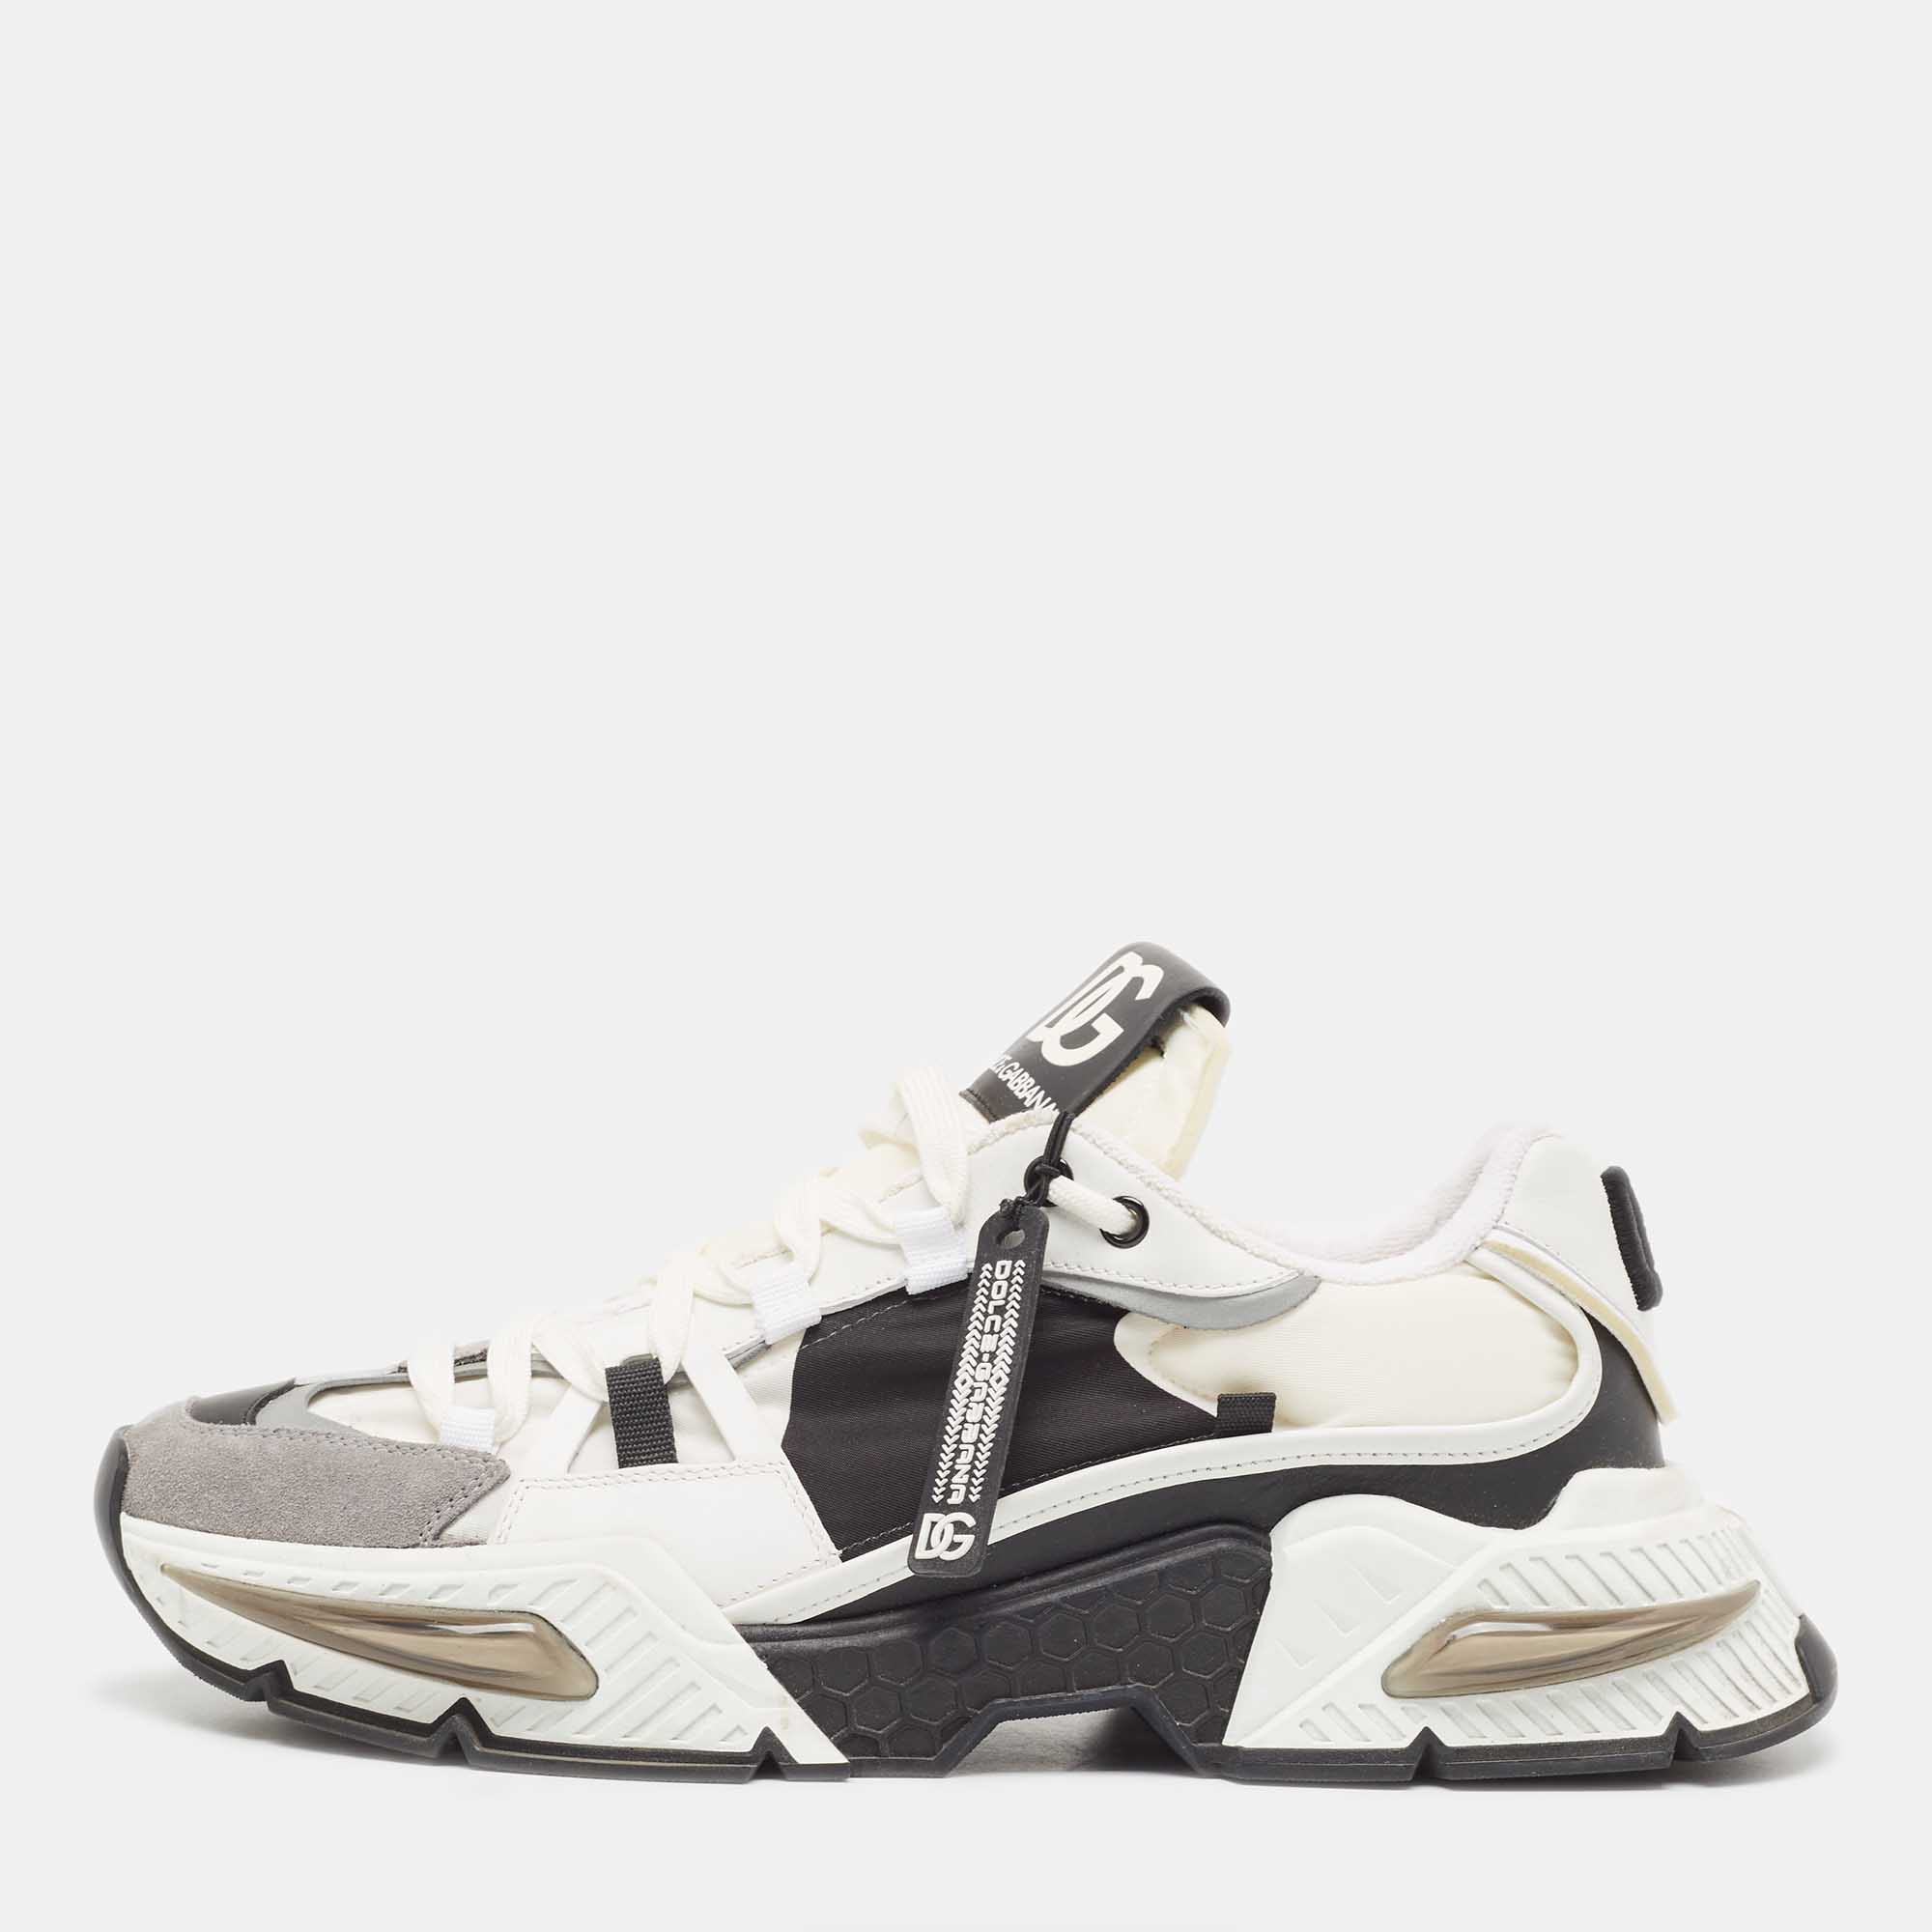 

Dolce & Gabbana White/Black Neoprene and Suede Airmaster Sneakers Size